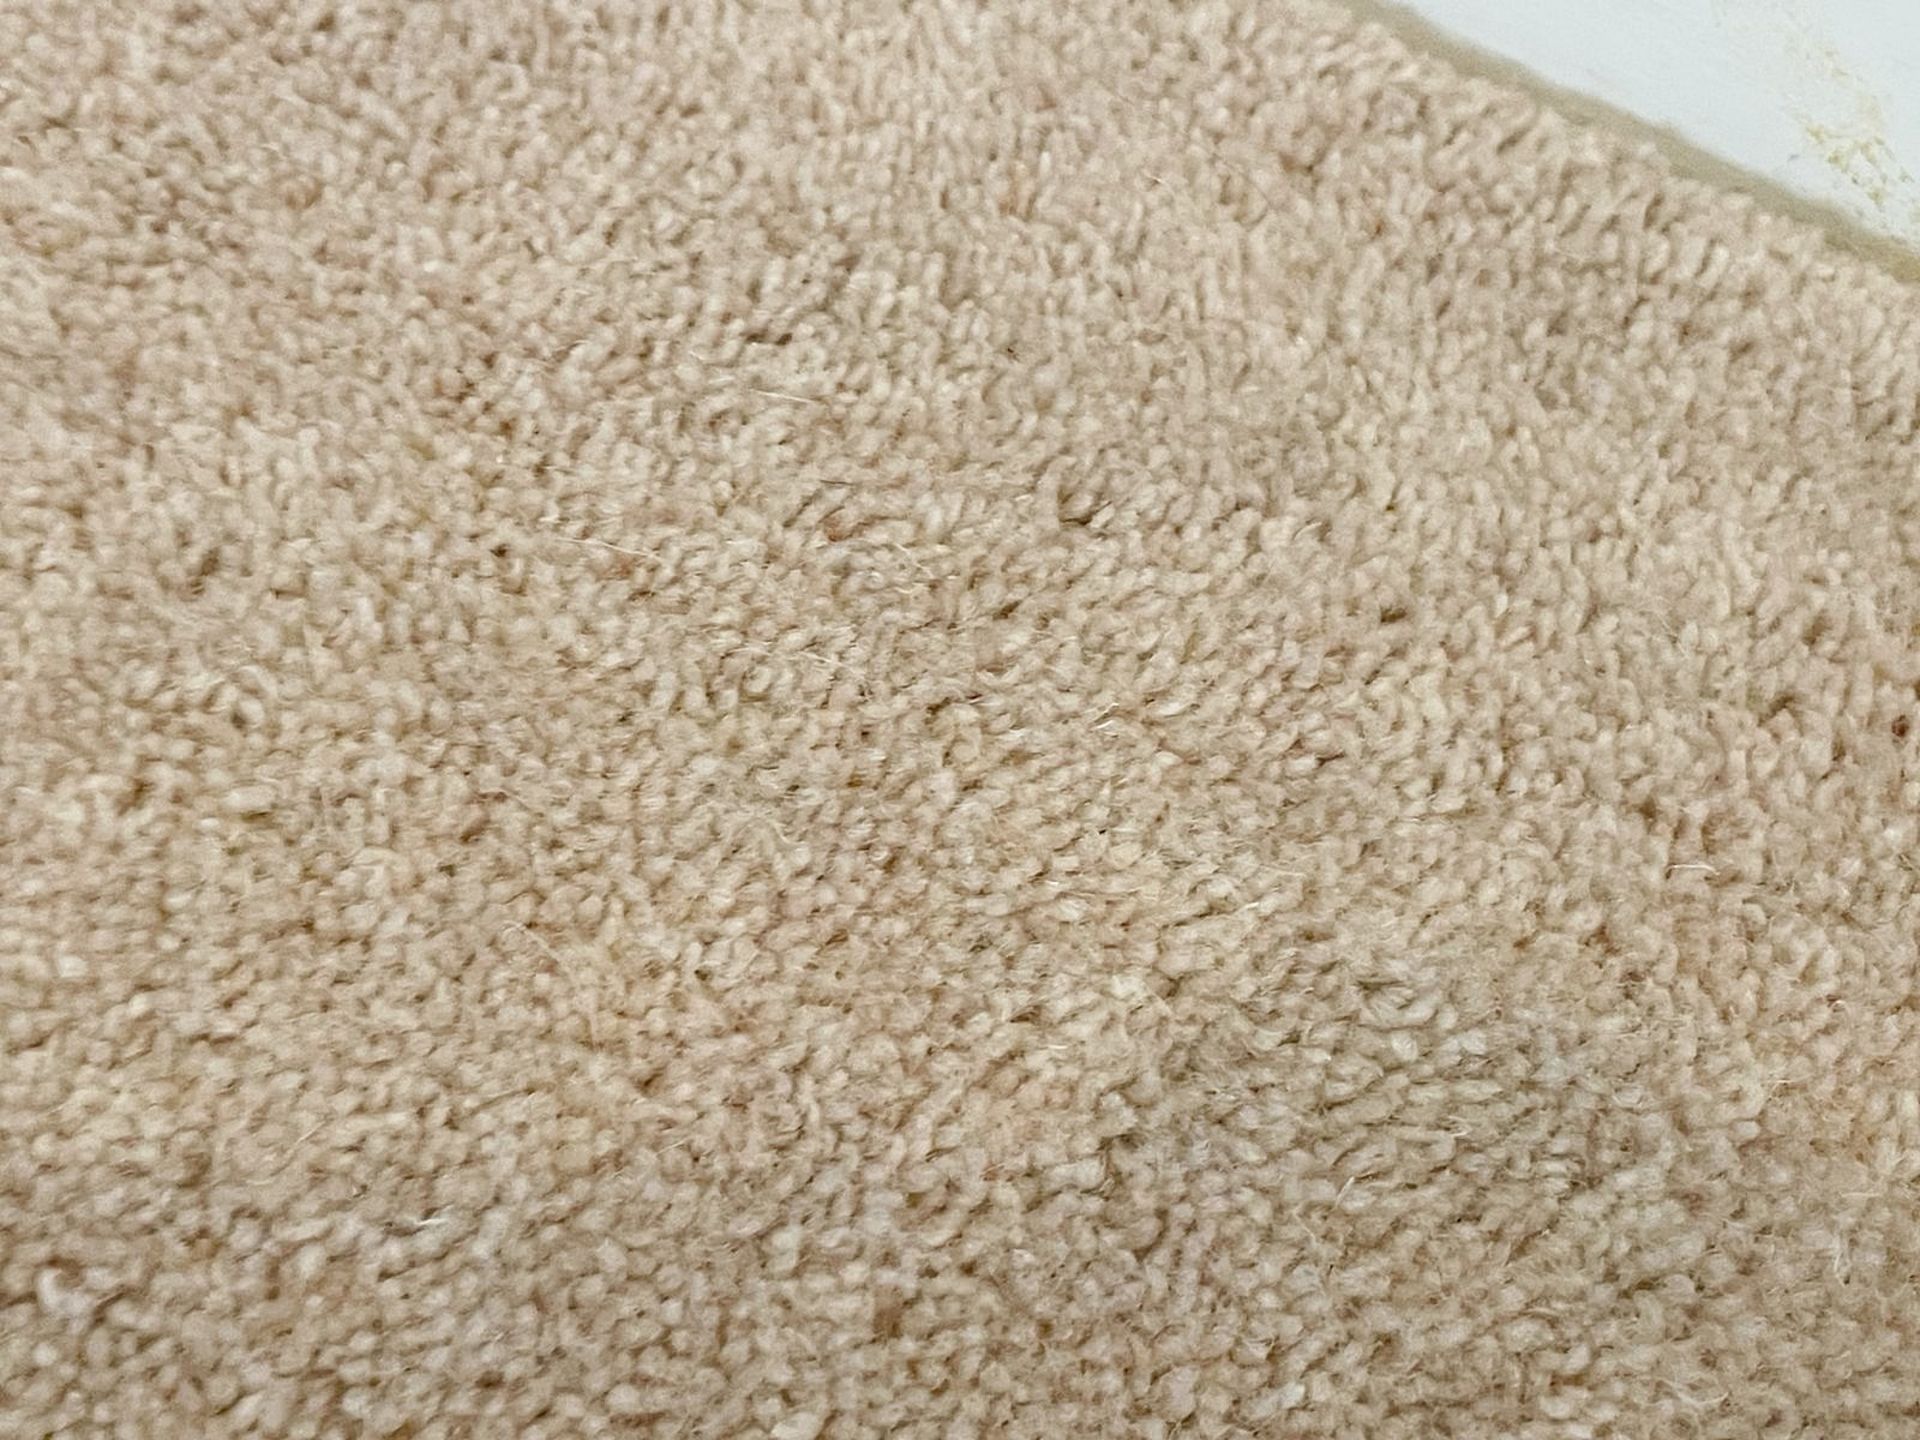 1 x Premium Wool Reception Room Carpet in a Neutral Tone + Underlay - NO VAT ON THE HAMMER - Image 4 of 7